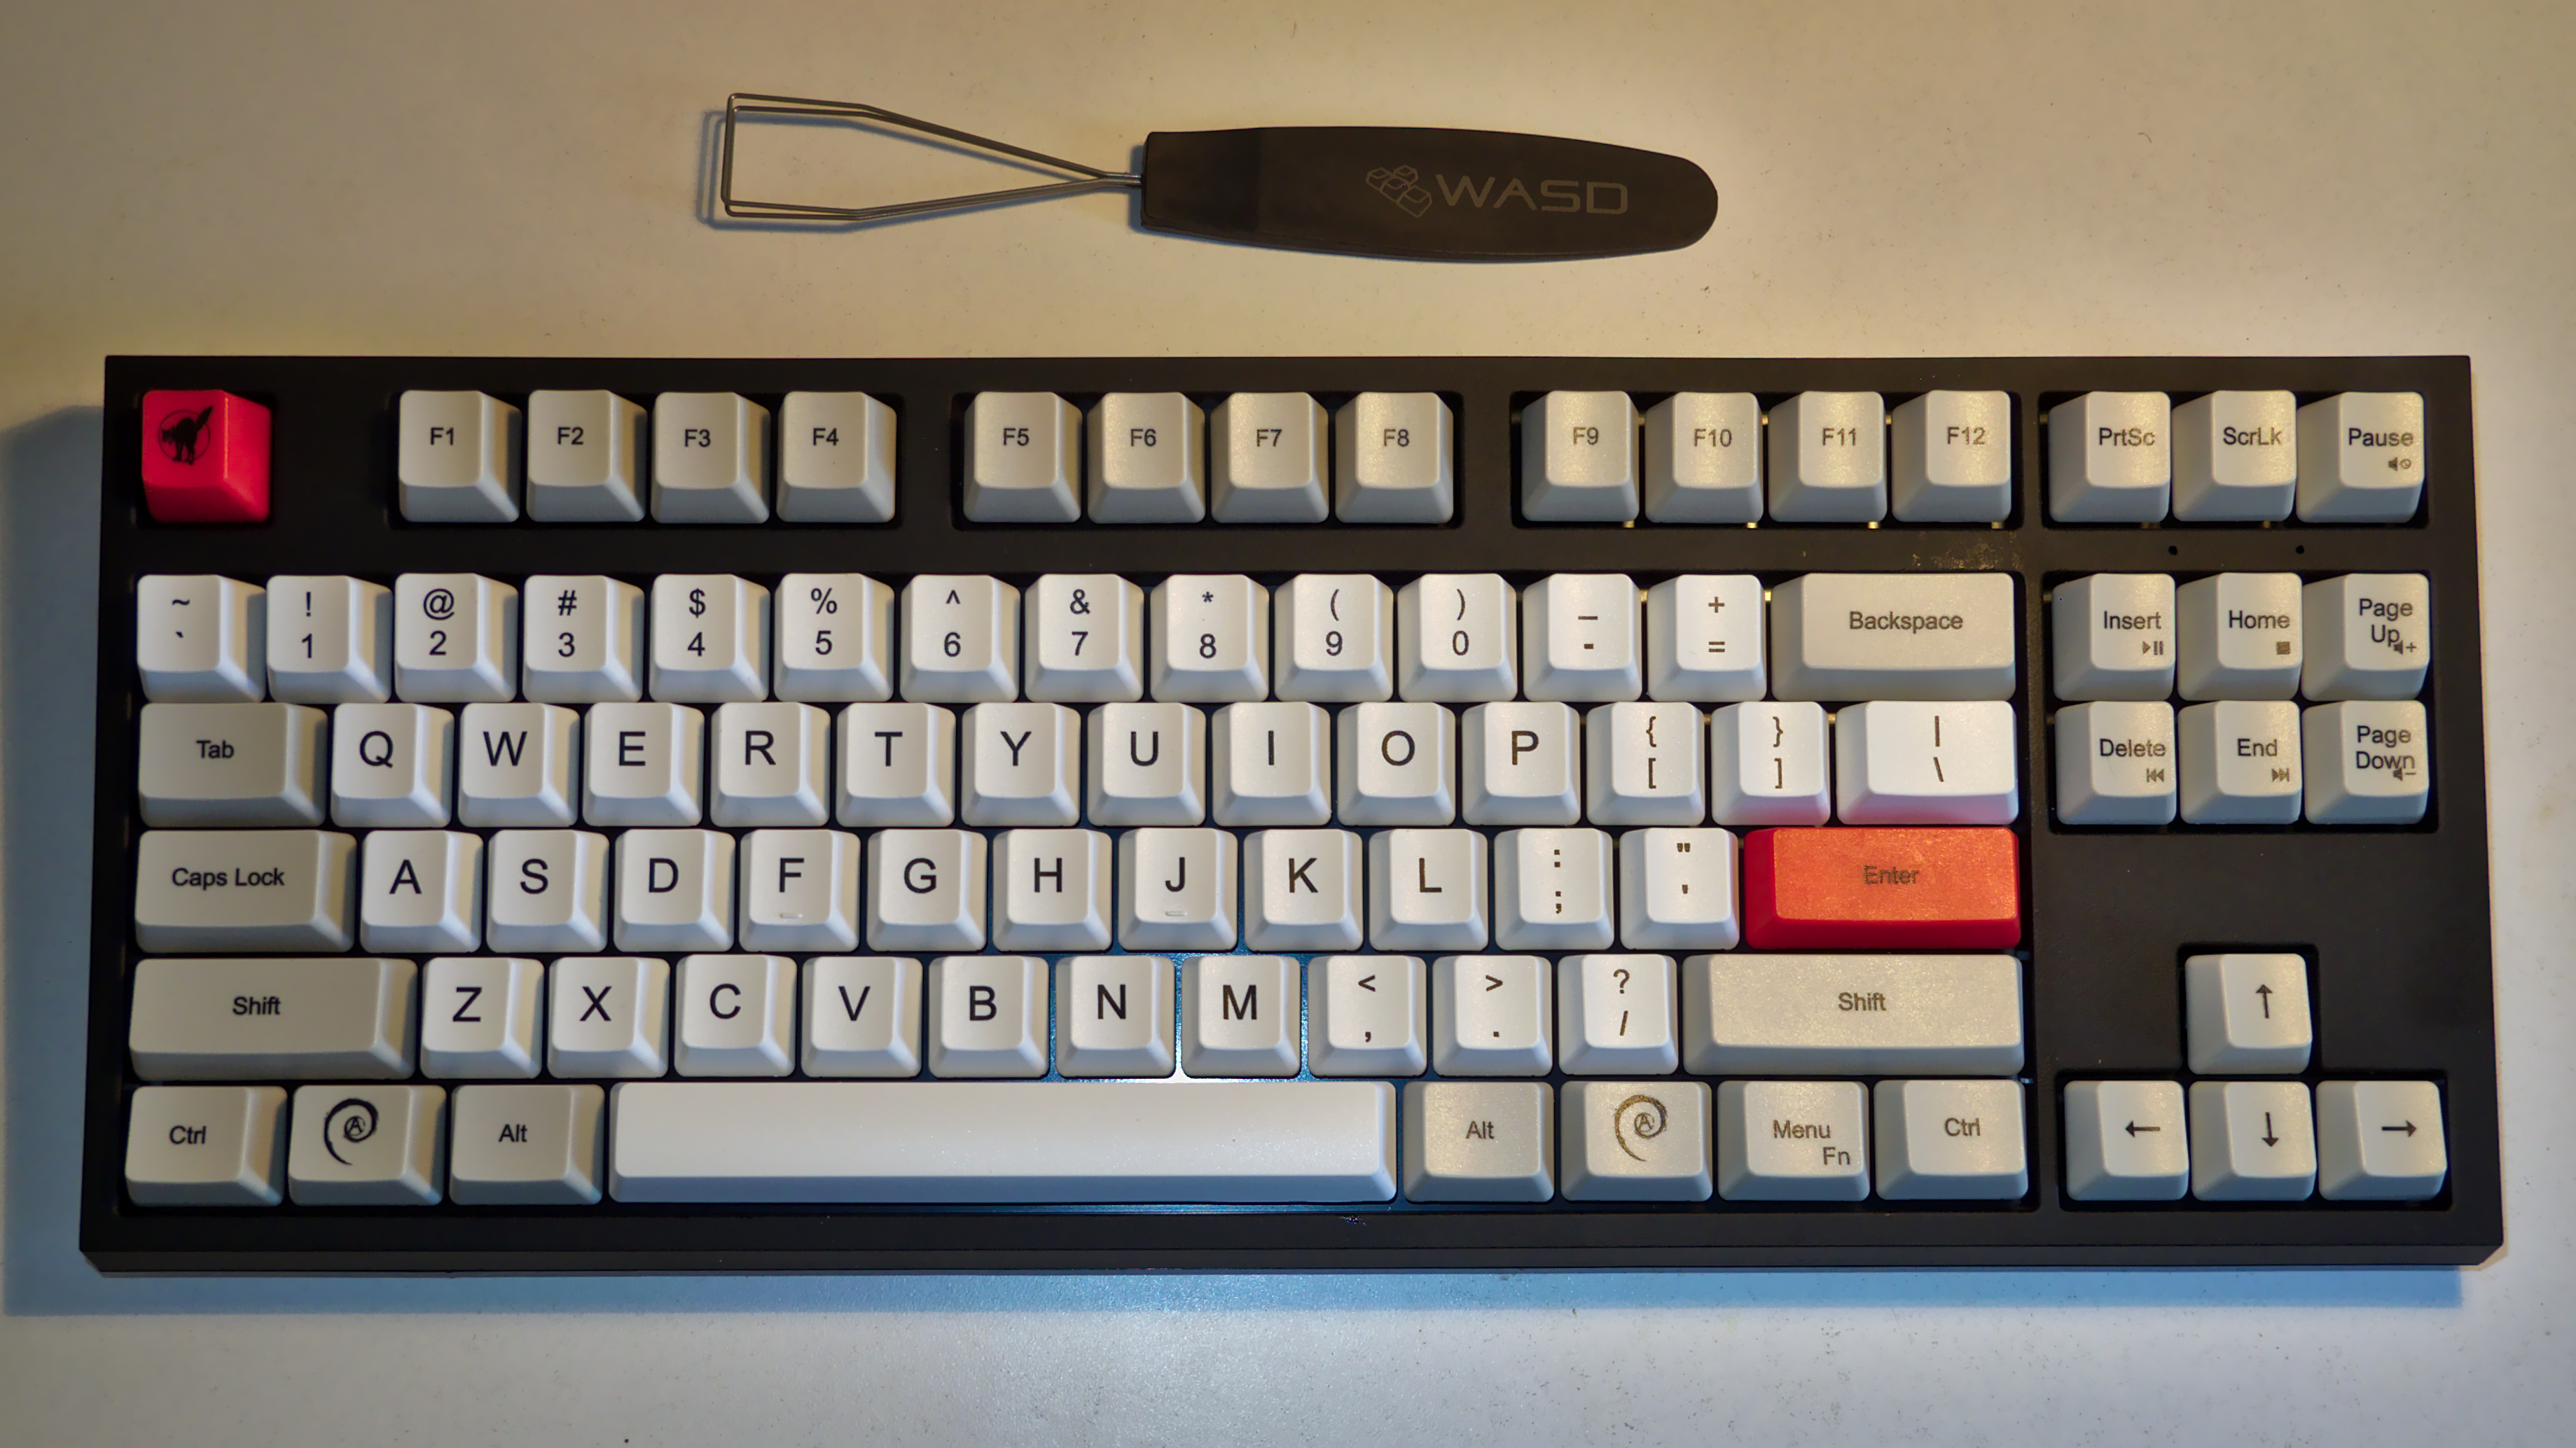 A photo of the keyboard which
has mostly white keys, except control keys in grey, enter and escape
in red. Key labels are in the middle of keys which is unusual.